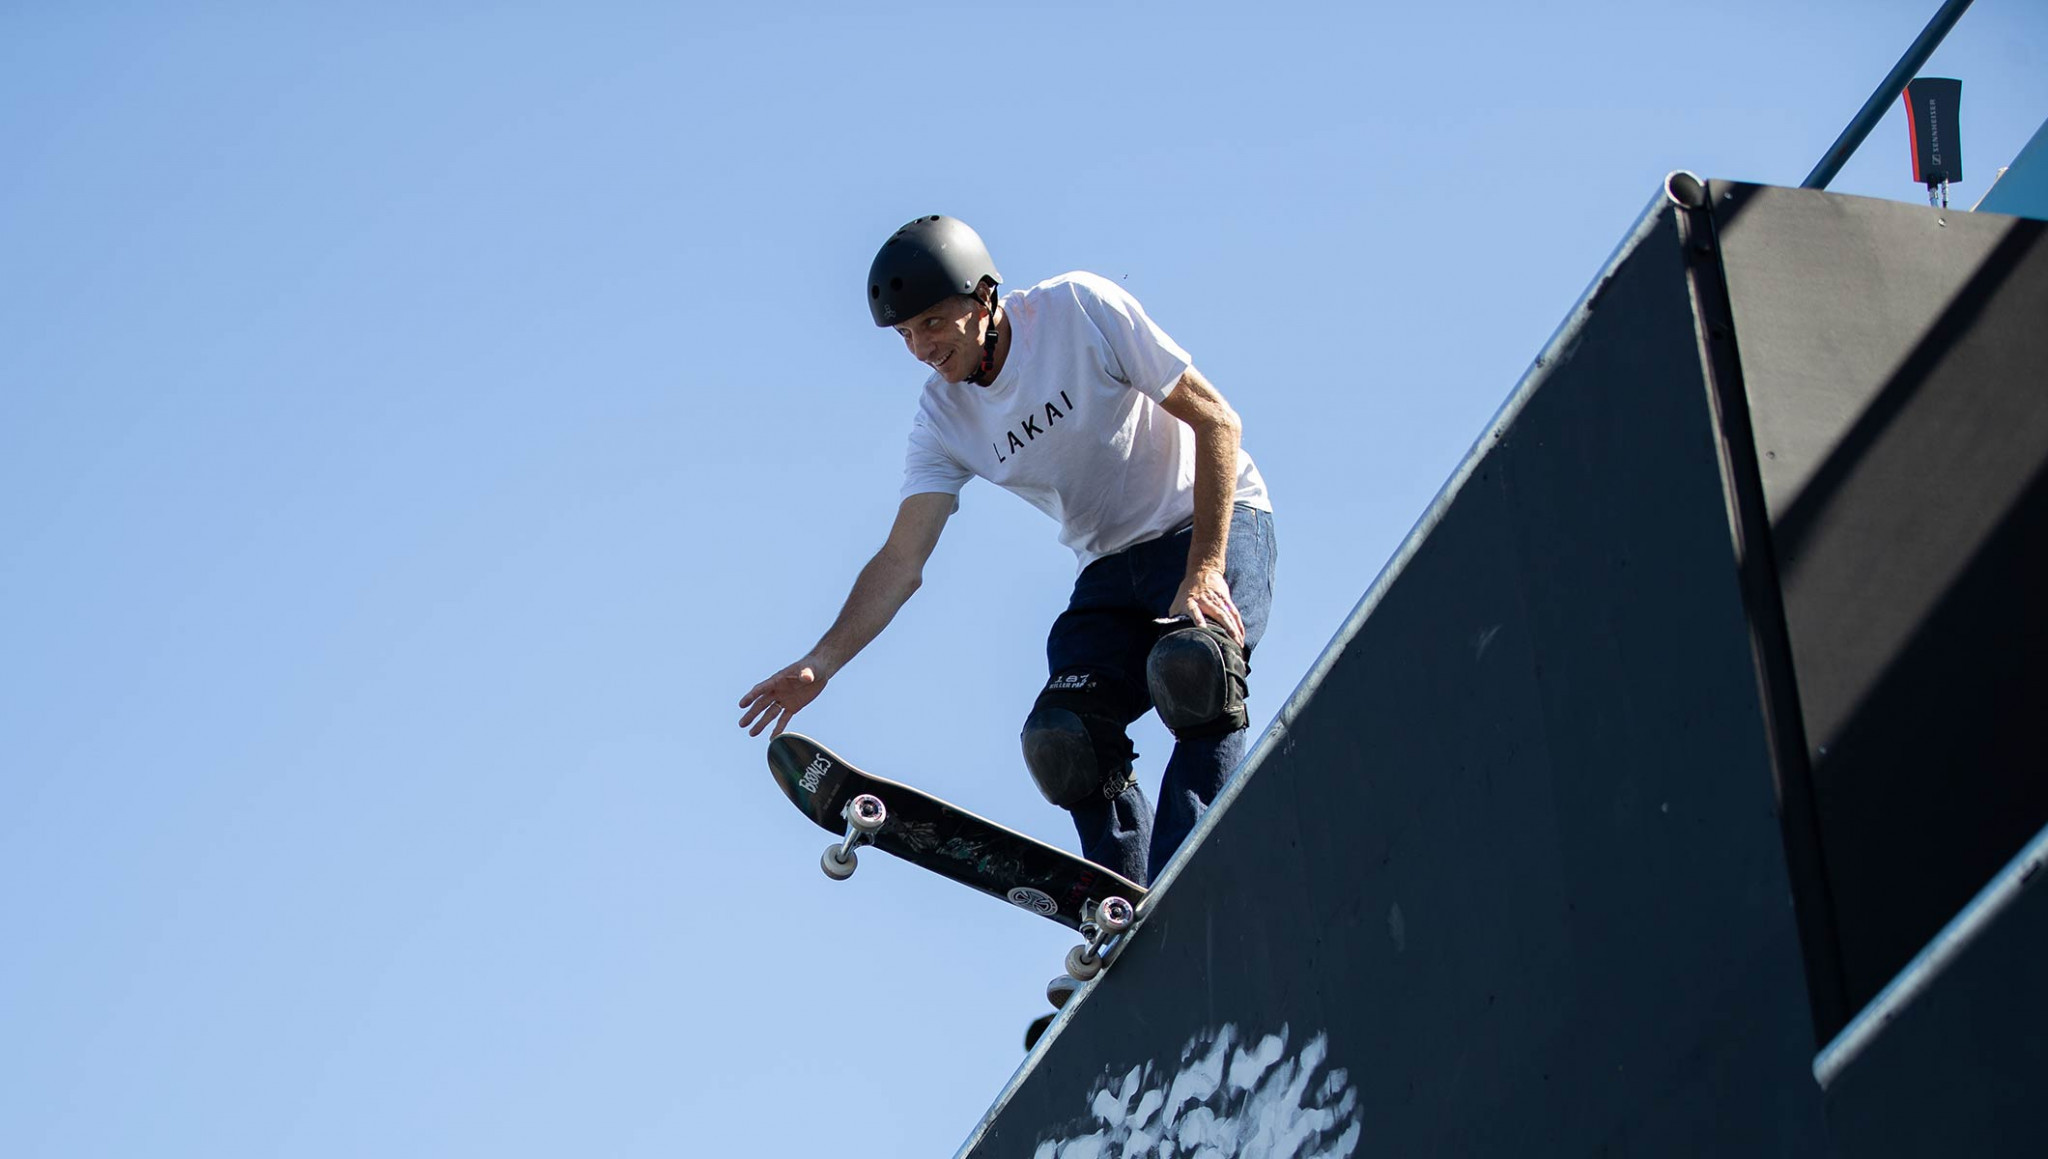 American skateboarding legend Tony Hawk was among the special guests on day one ©IOC